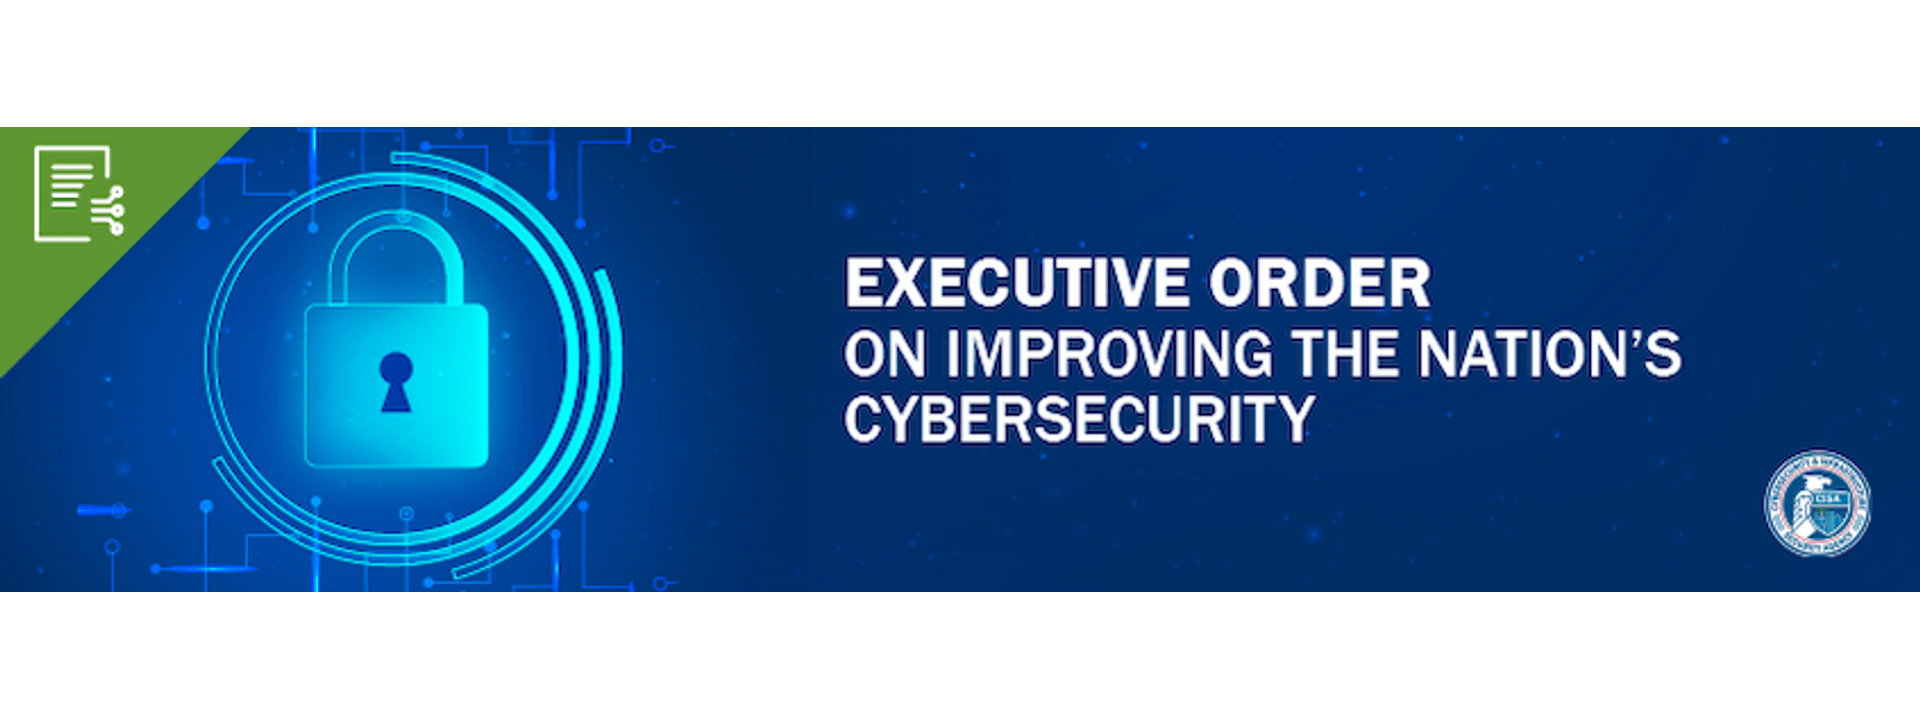 Executive Order Cyber Security